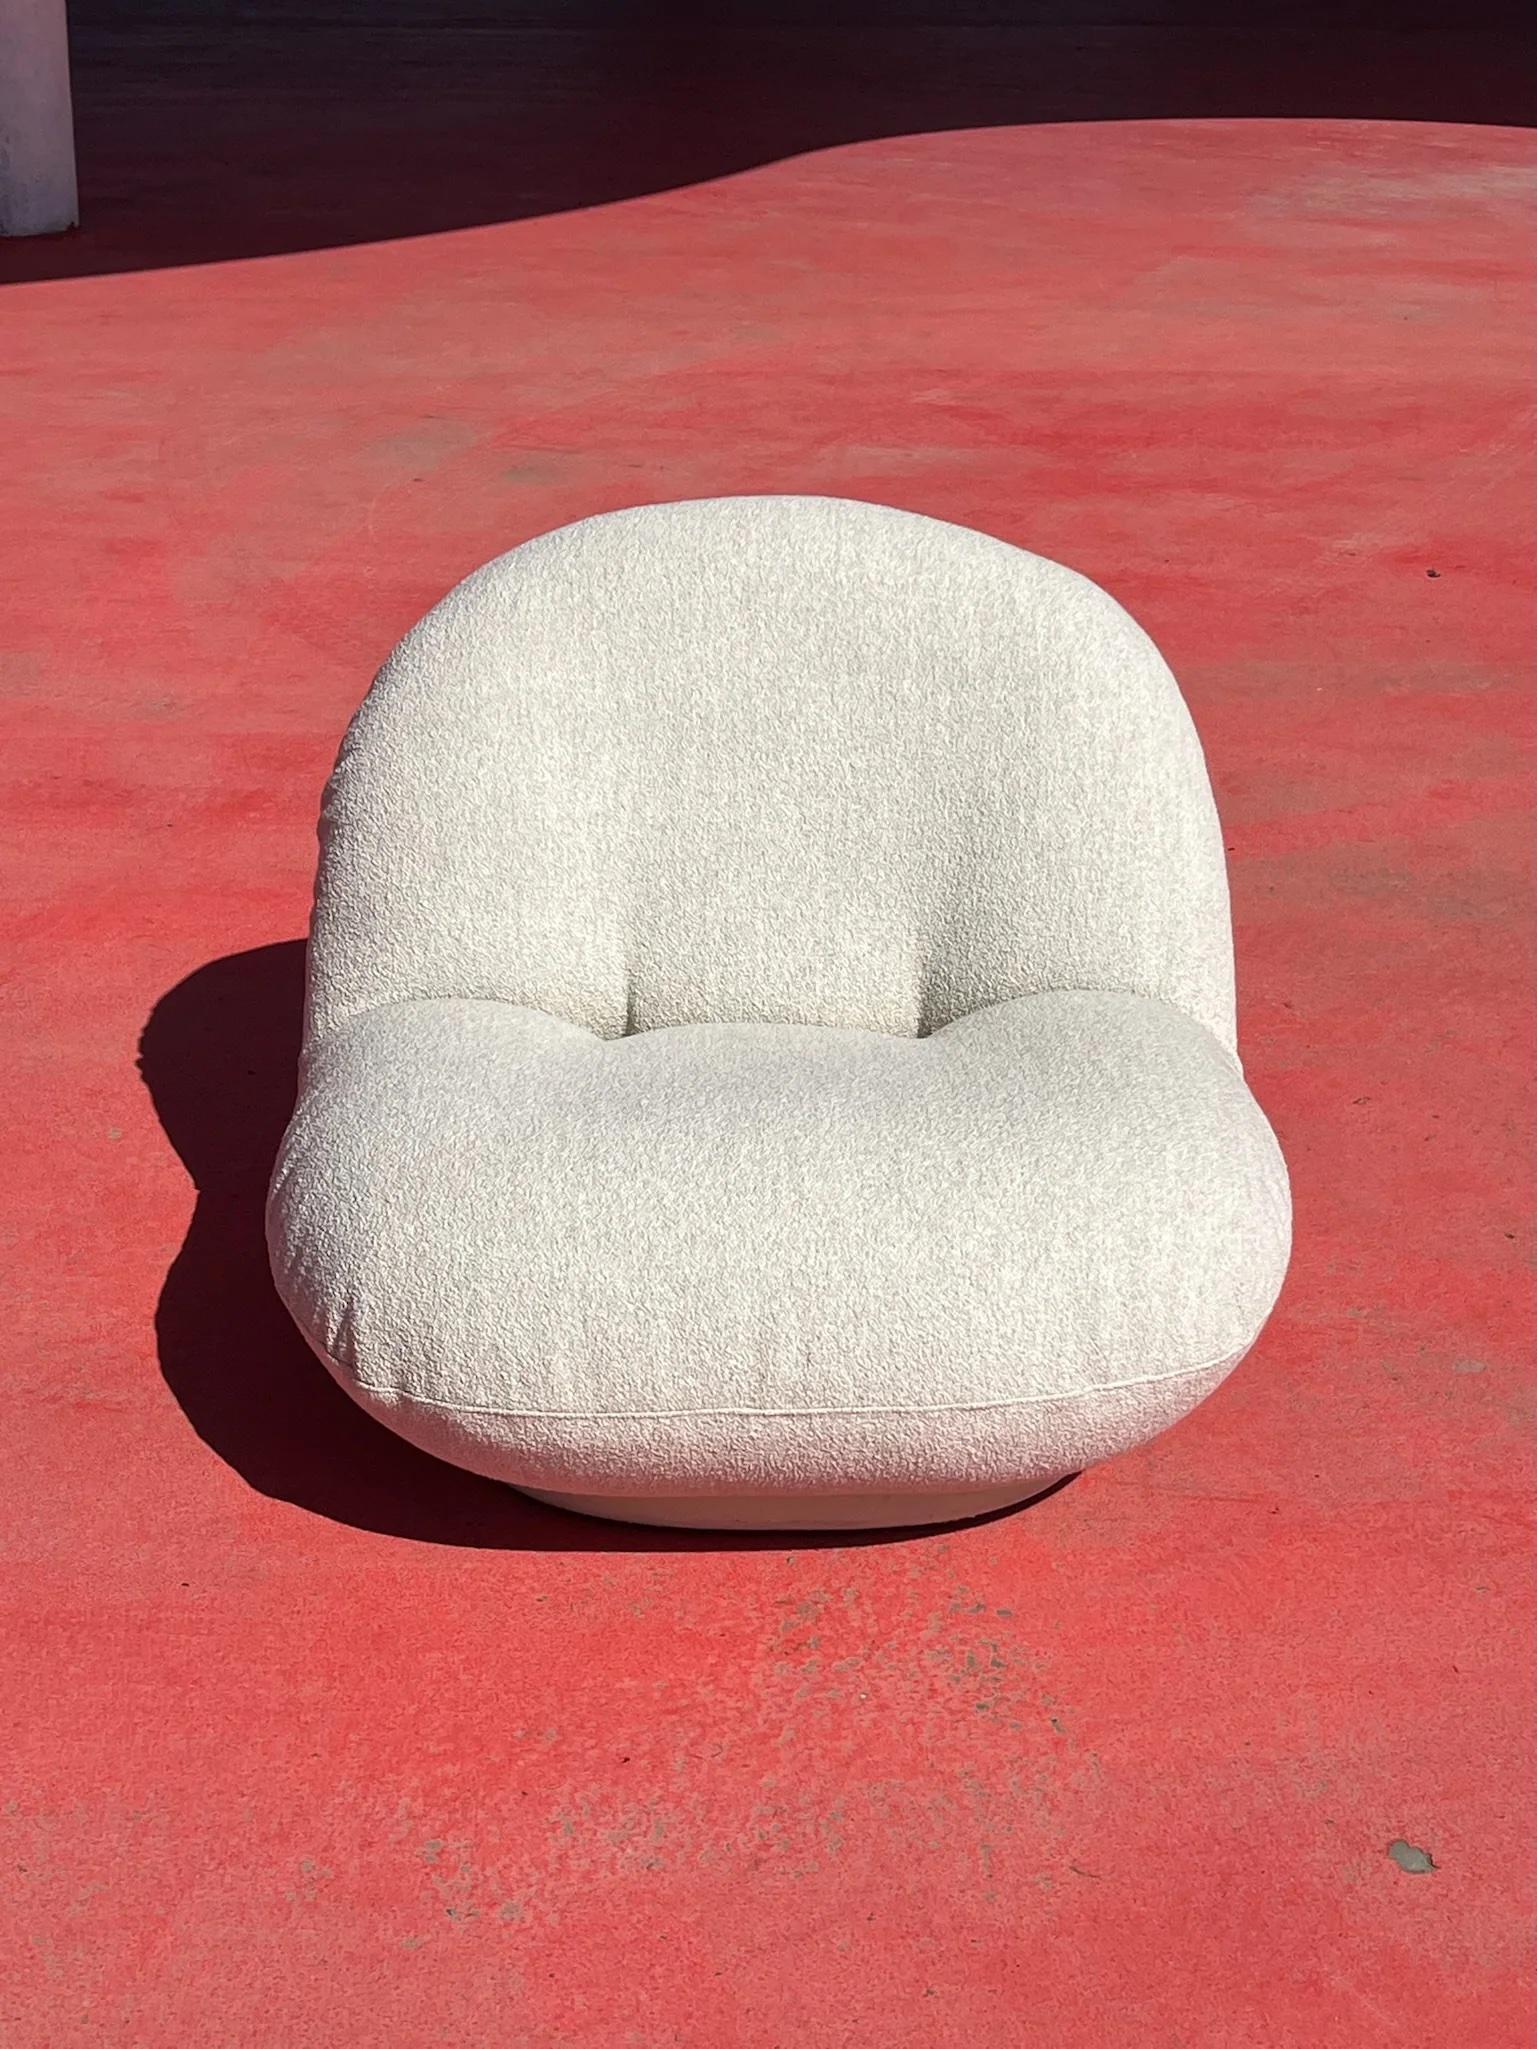 An iconic piece of design by Pierre Paulin, designed in 1975. Produced and labeled by Edition Mobilier International in 1981. The chair has been upholstered with Aristide Teddy in Offwhite.

Pierre Paulin enrolled in the École Camondo design school